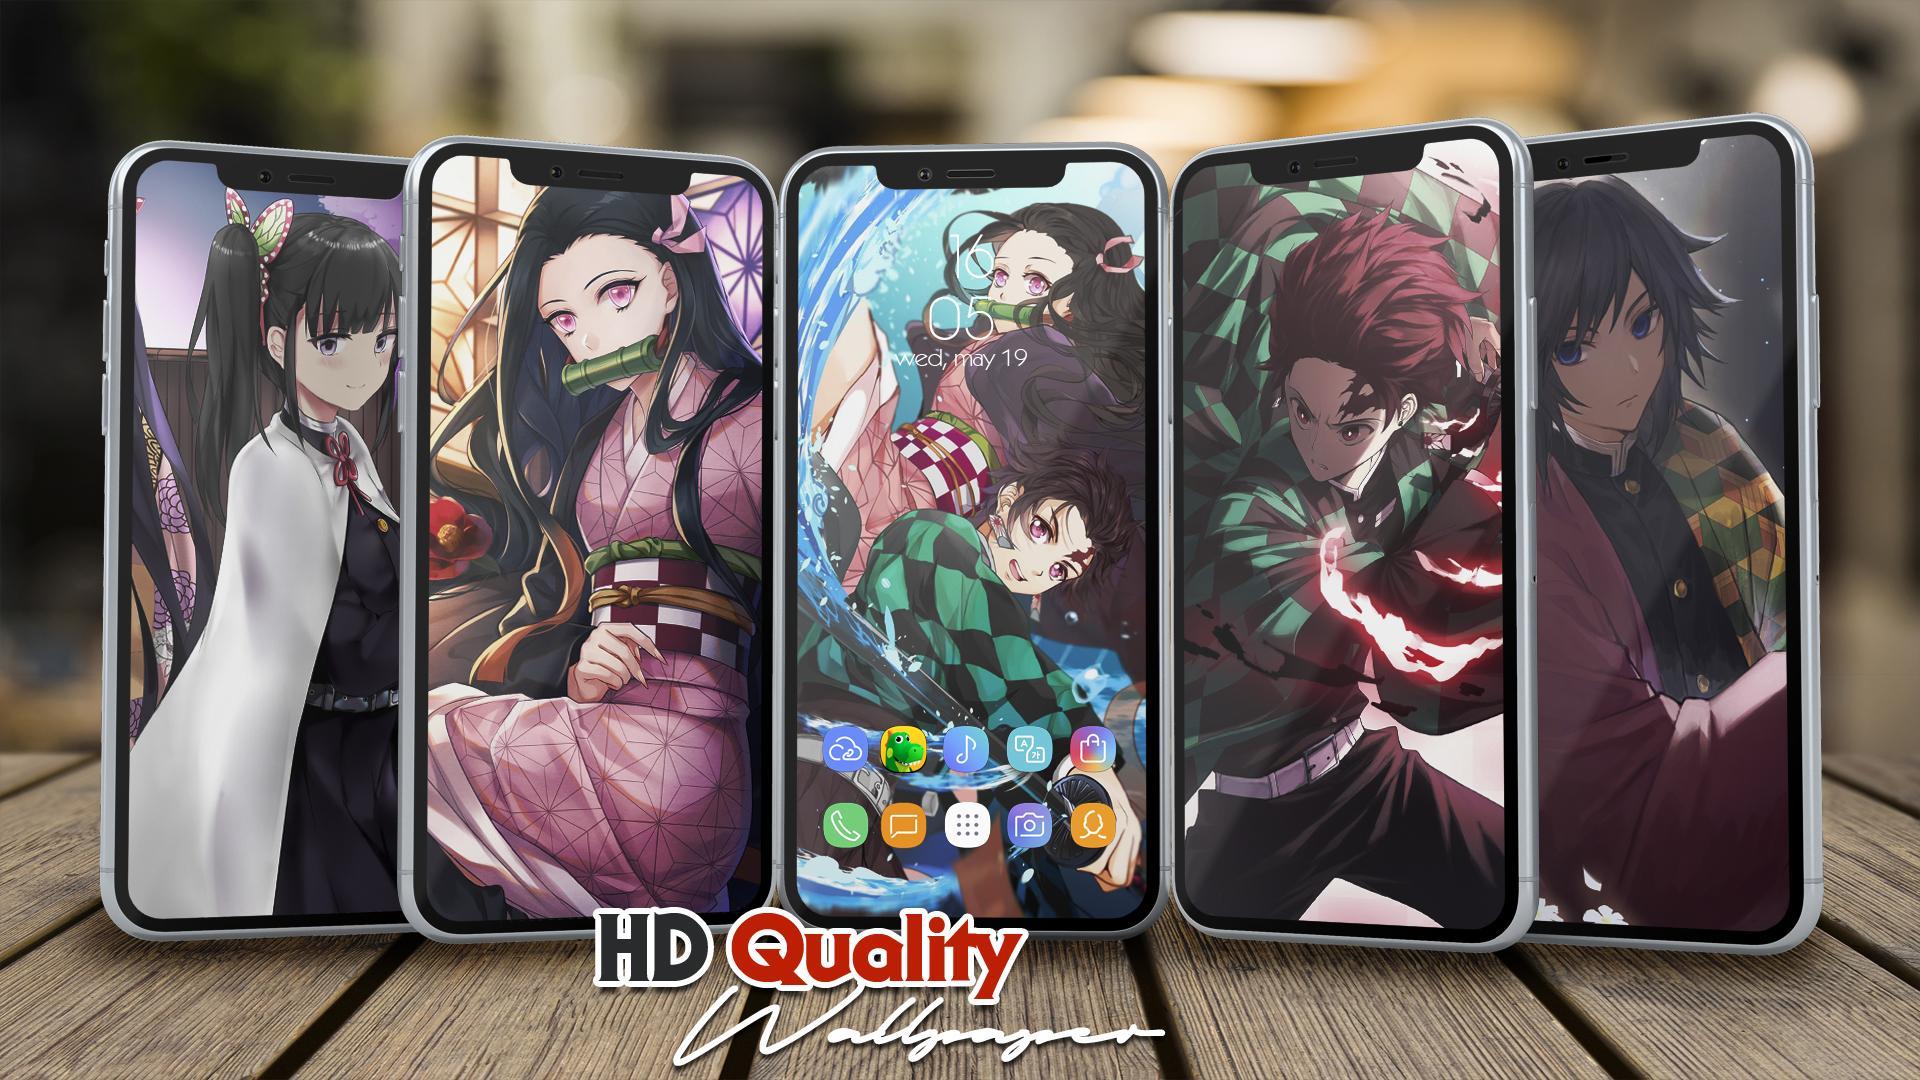 Hd Demon Slayer Anime Wallpaper For Android Apk Download